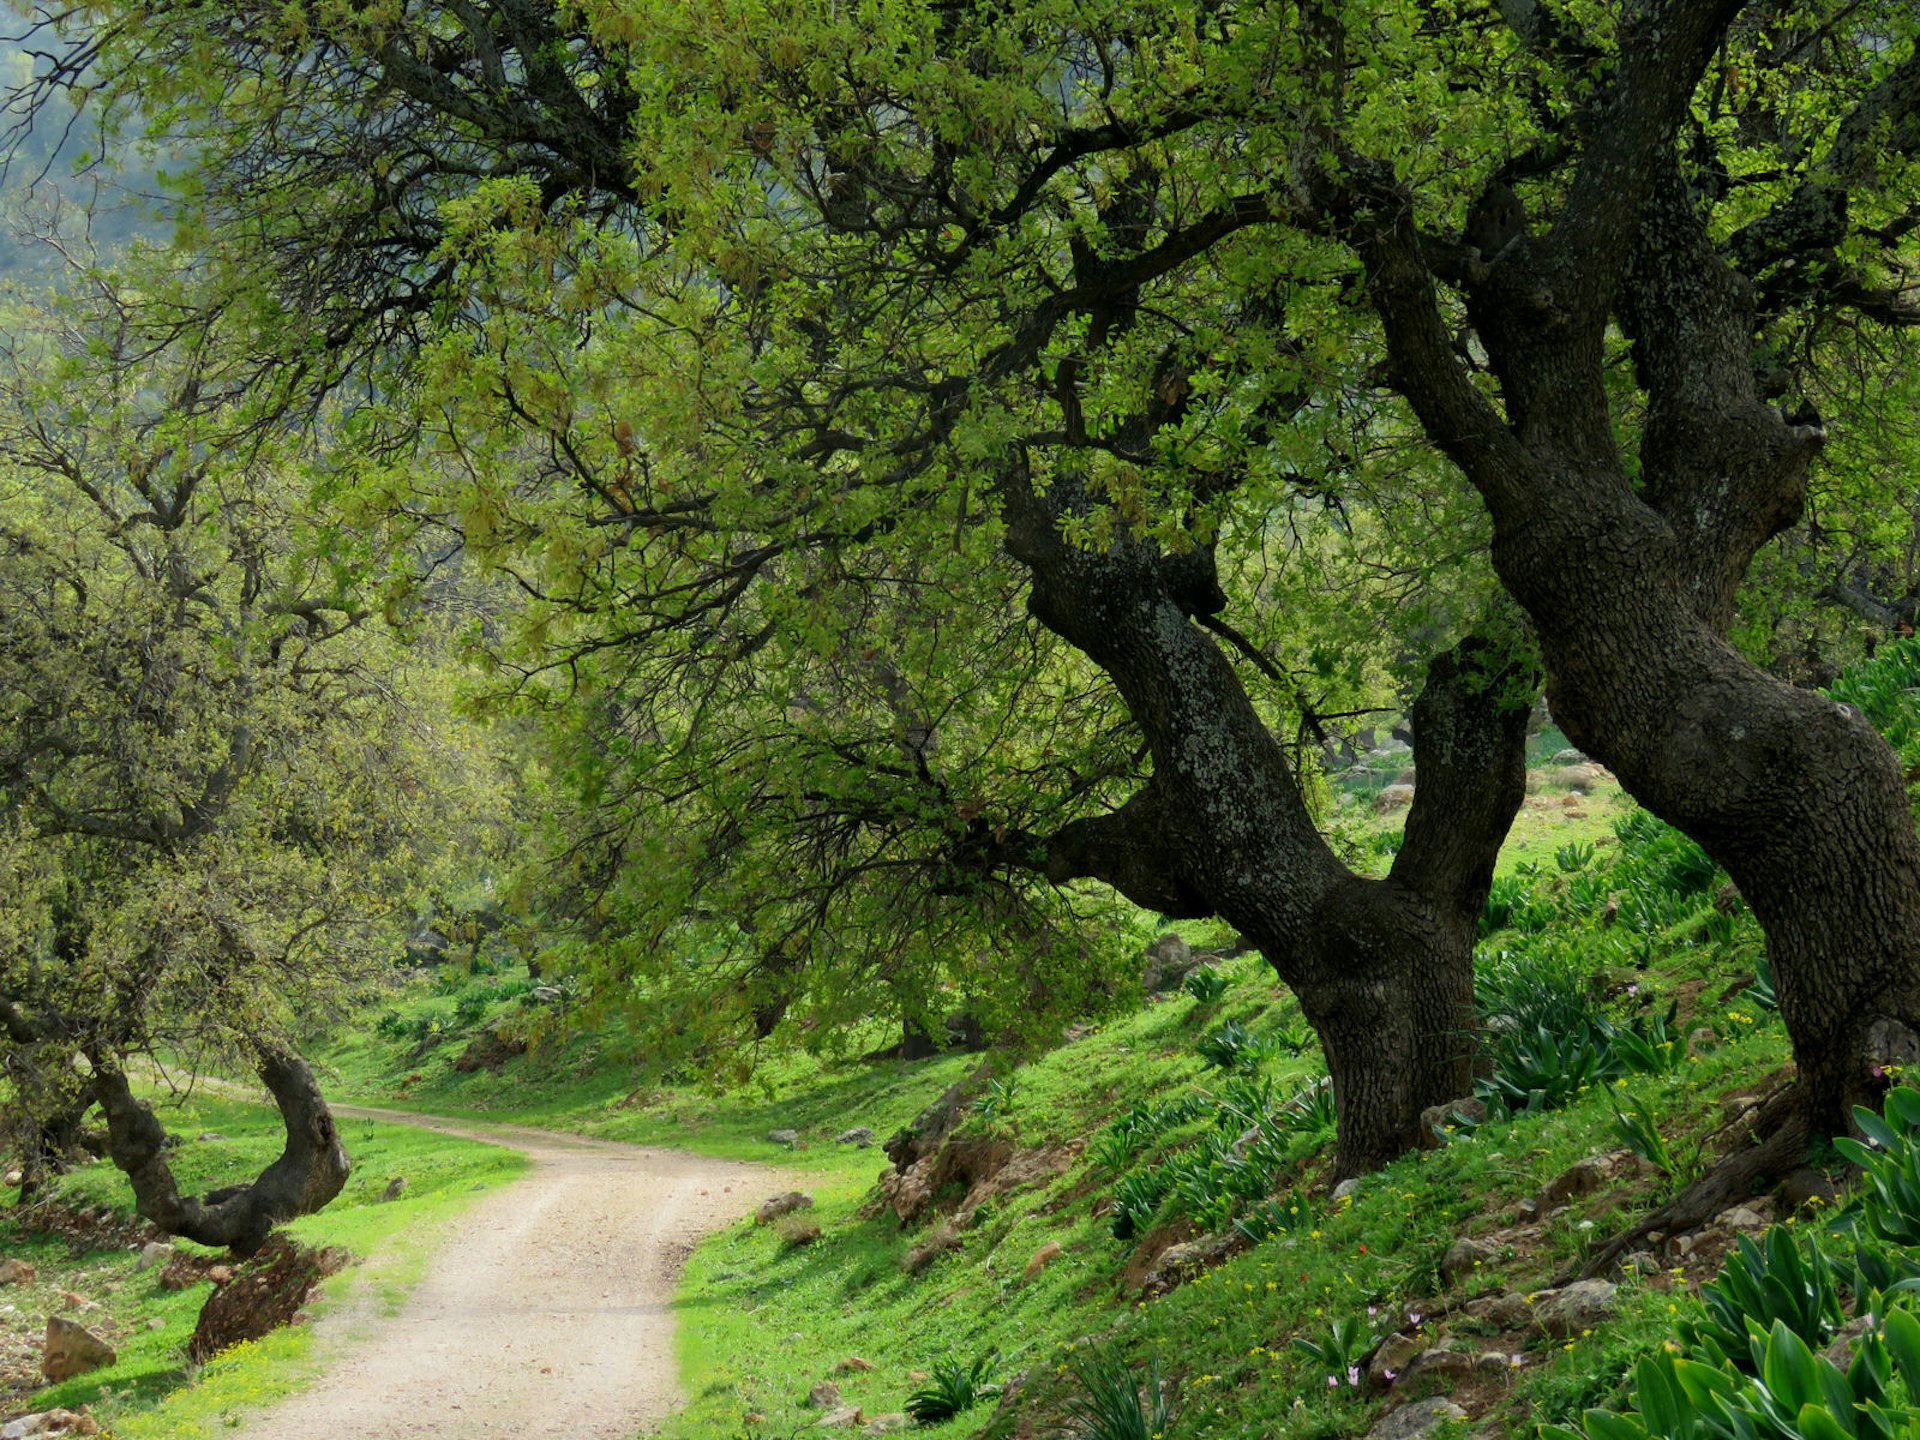 A small road between trees in Ajloun in the north of Jordan. Image by omardajani / Shutterstock